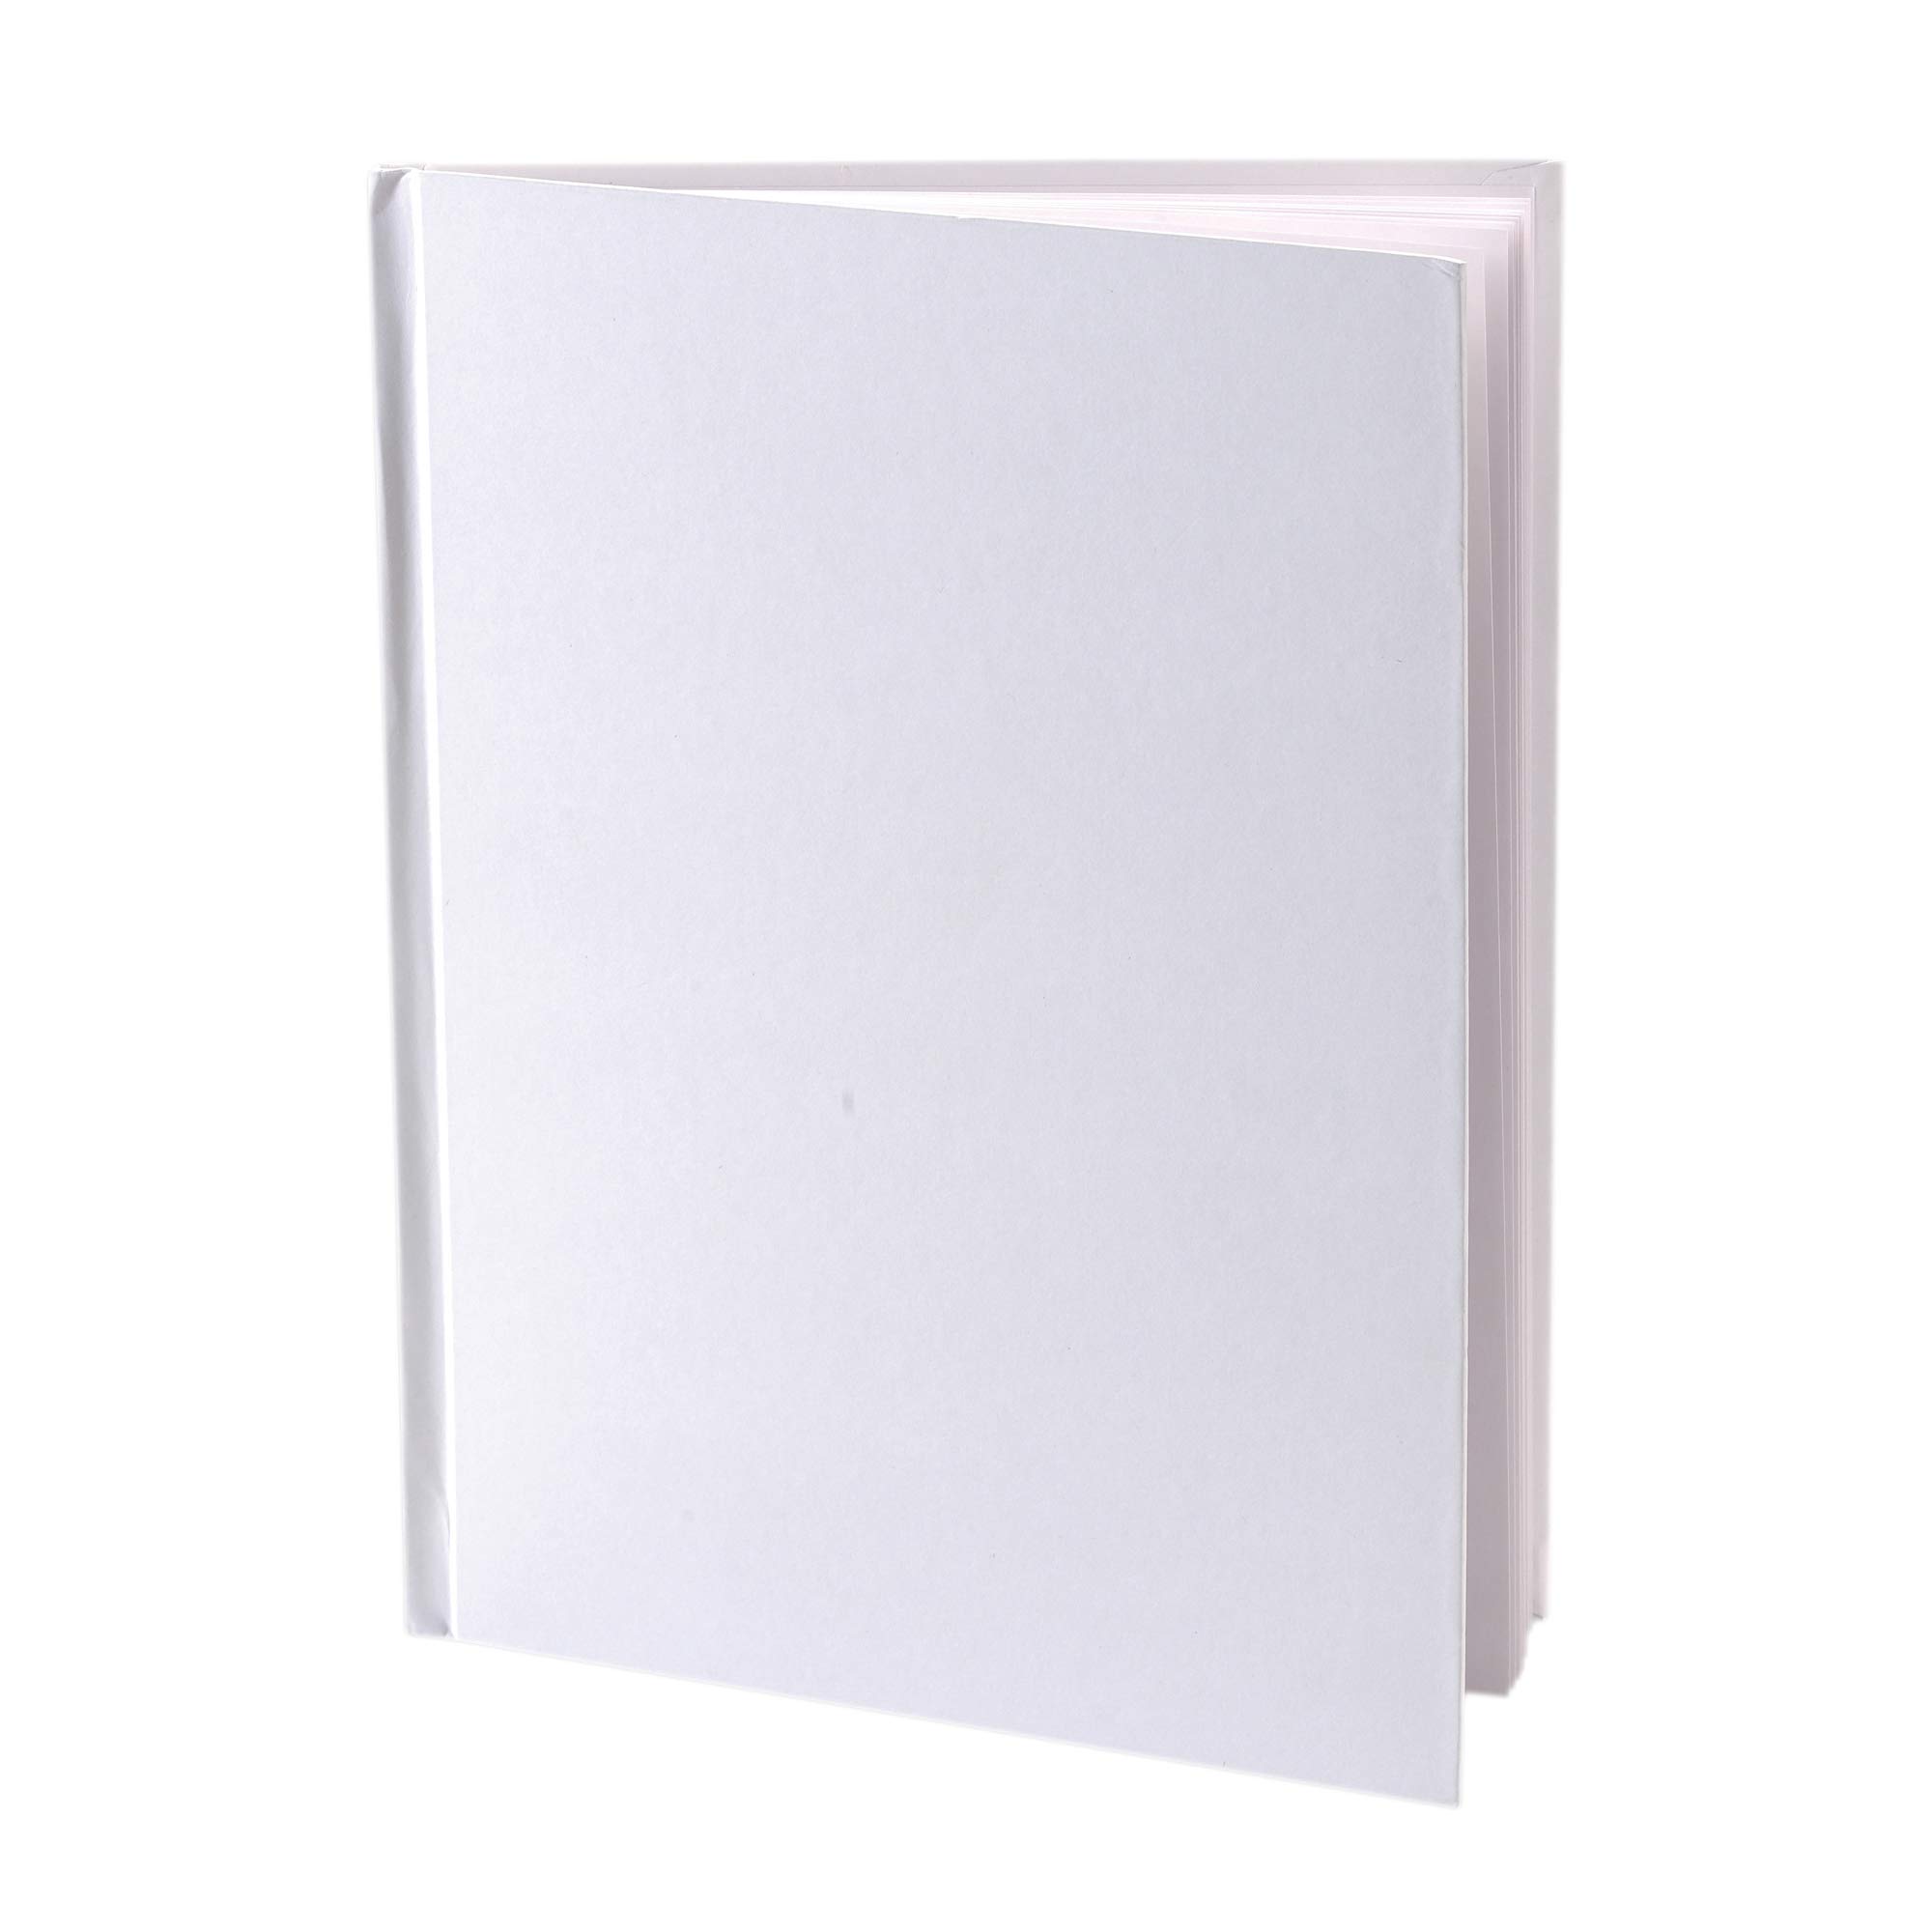 6" x 8" 28-Page Ashley Productions Portrait Style Hardcover Blank Book (White) $1.60 + Free Shipping w/ Prime or on $35+